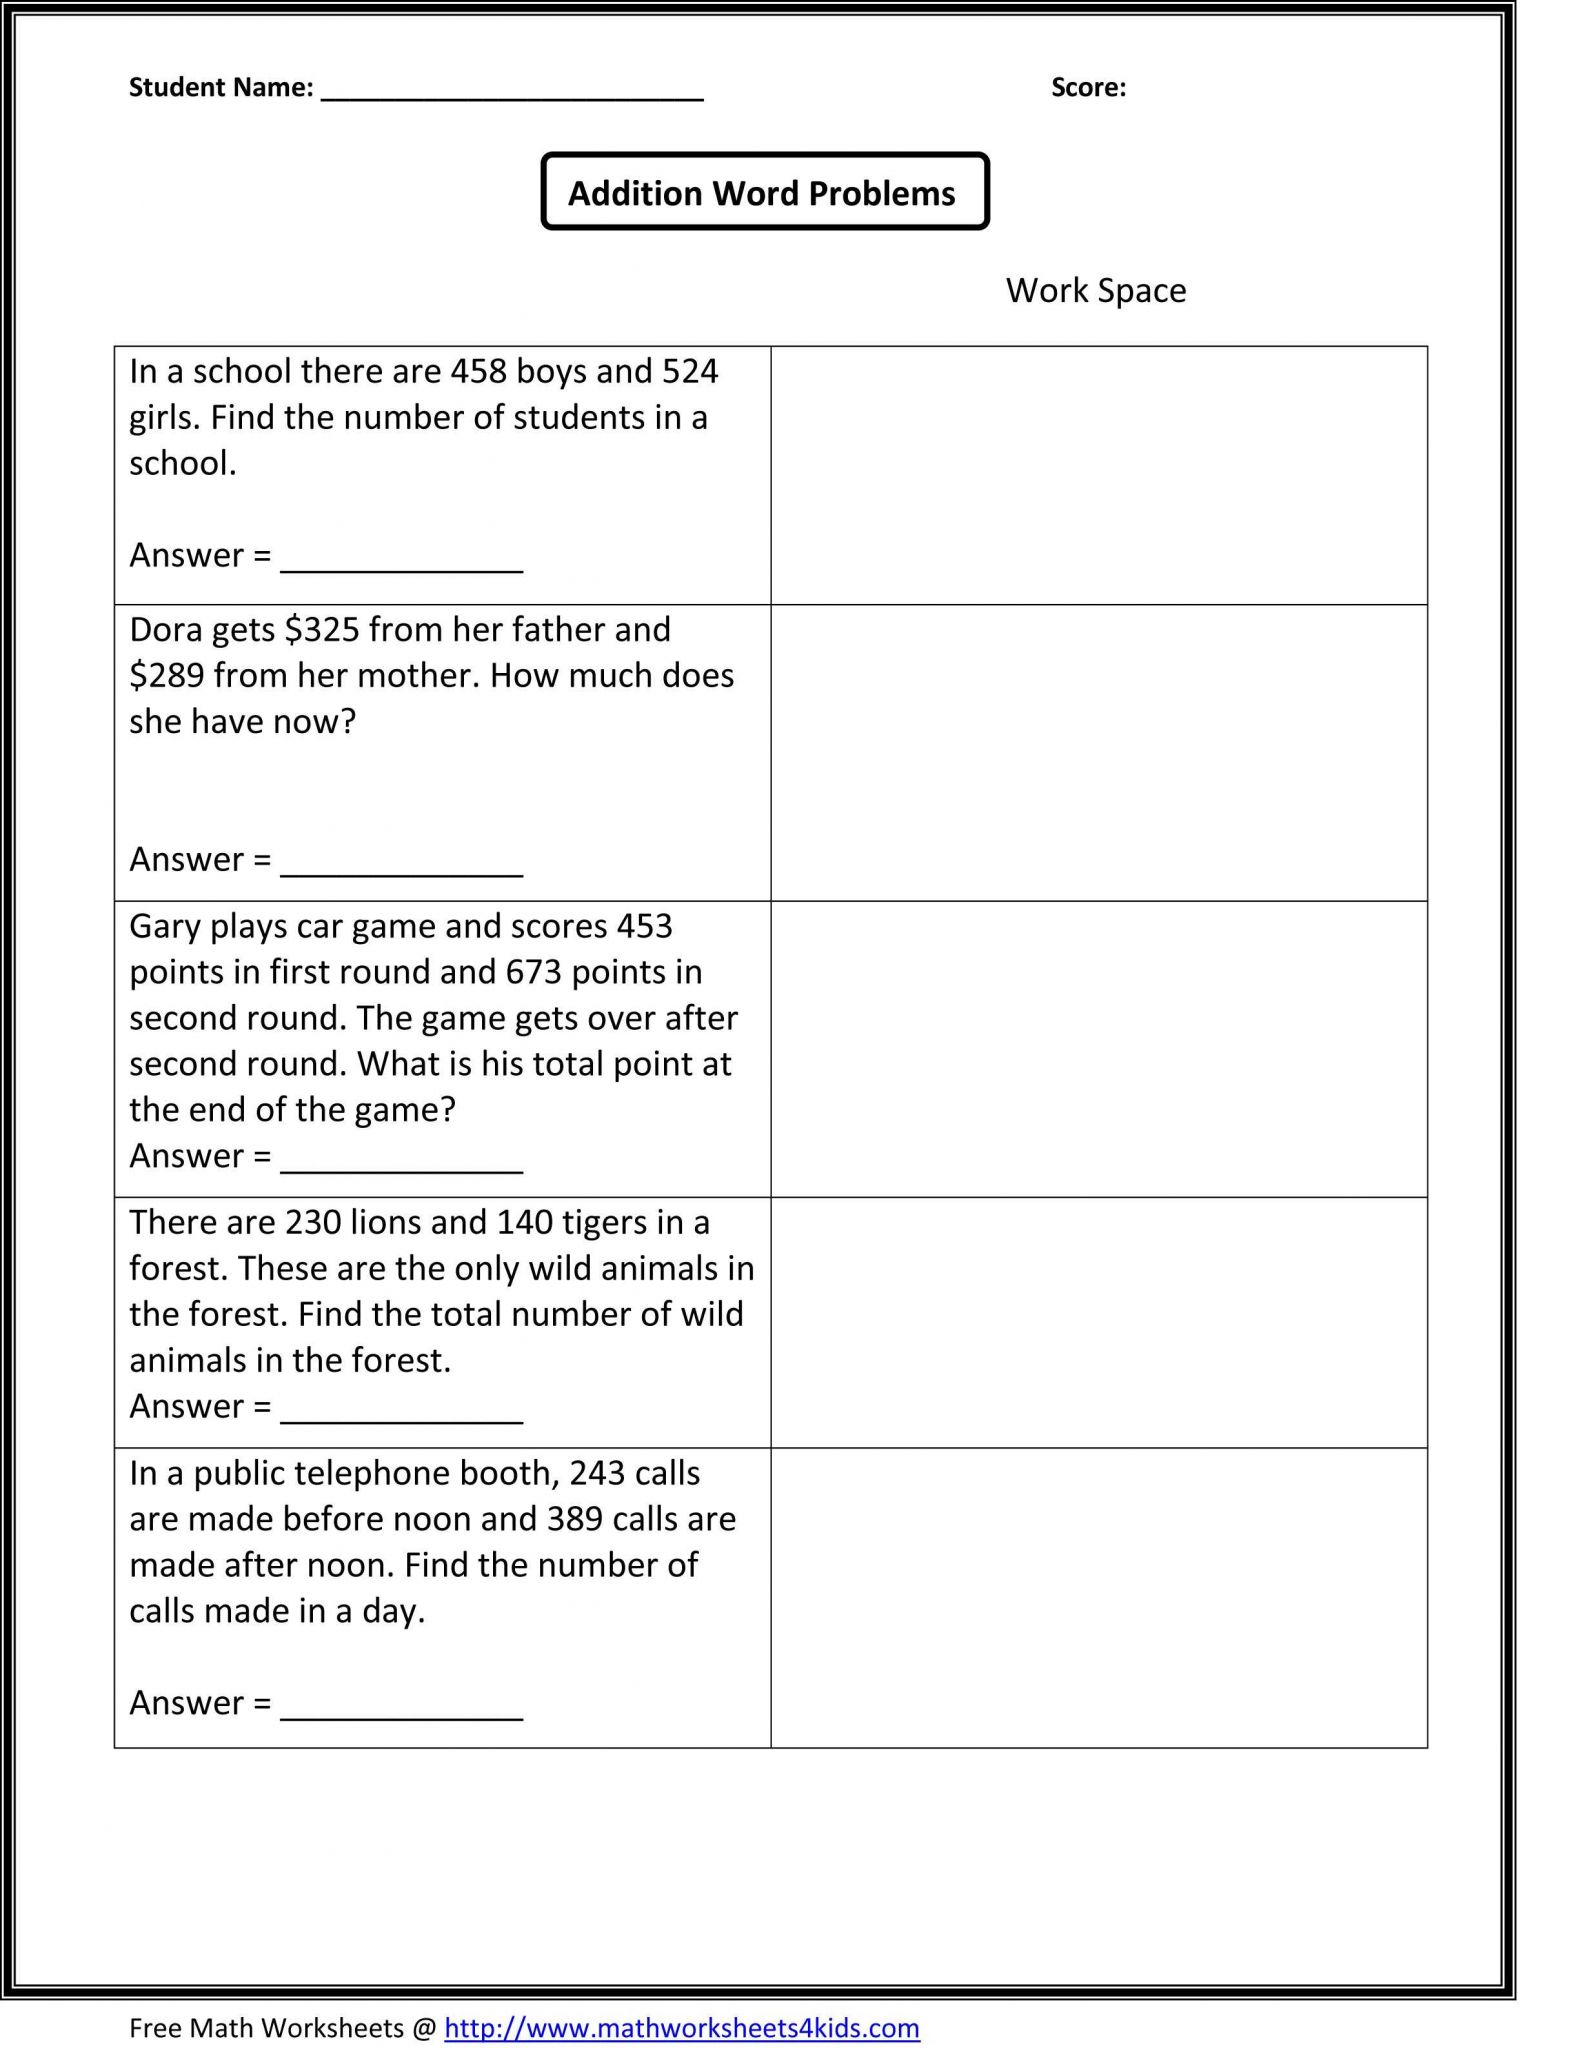 Estimating Sums and Differences Worksheets together with Money Math Word Problems Worksheets 5th Grade Best Word Problems